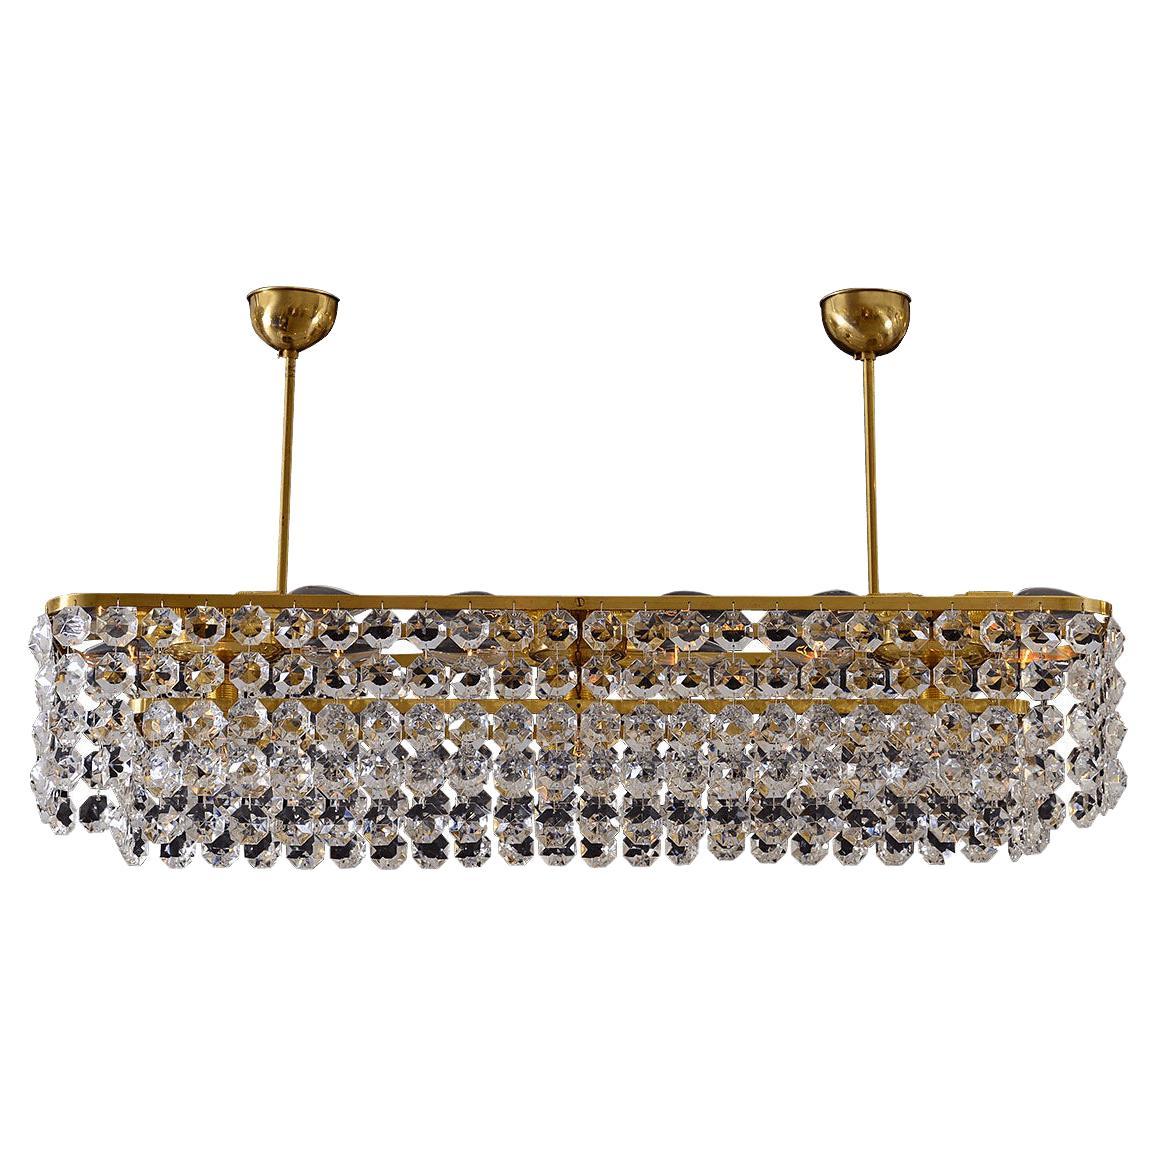 Mid-Century Modern Style Brass and Glass Chandelier, Re Edition